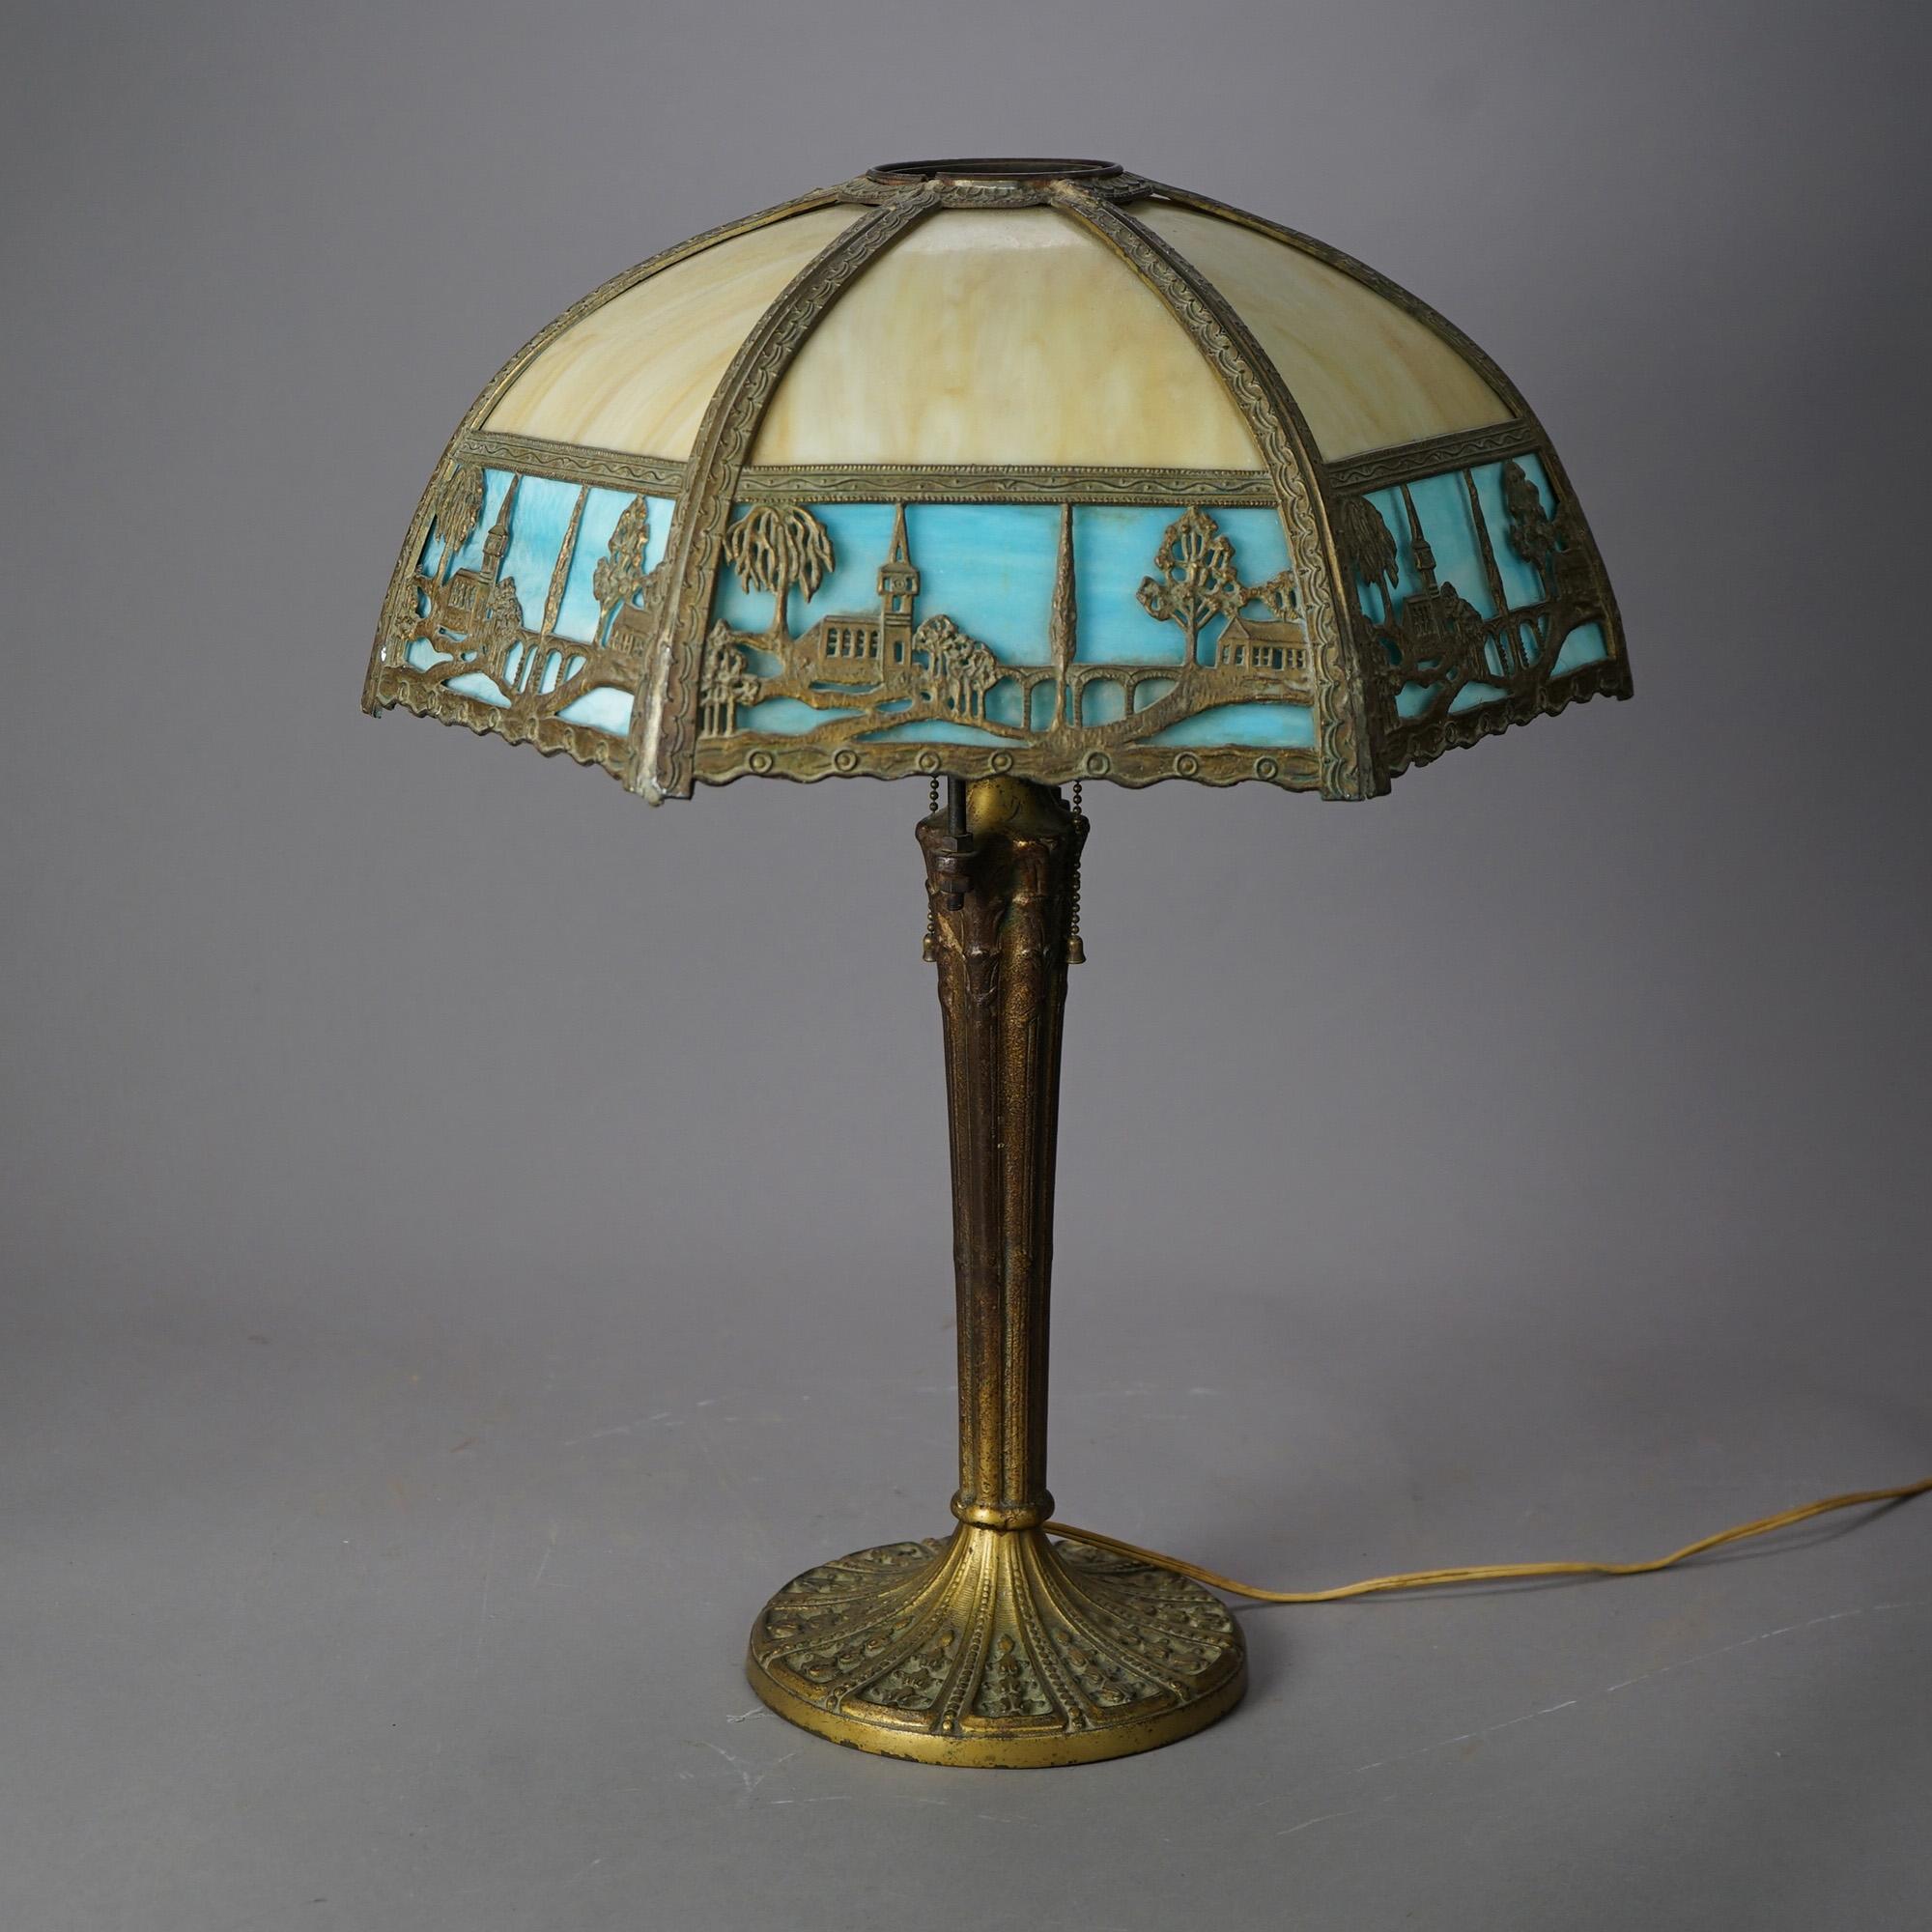 An antique Arts and Crafts table lamp offers dome form shade having cast metal frame with band having countryside scene with a church and housing two-tone bent slag glass panels over double socket cast base, c1920

Measures - 22